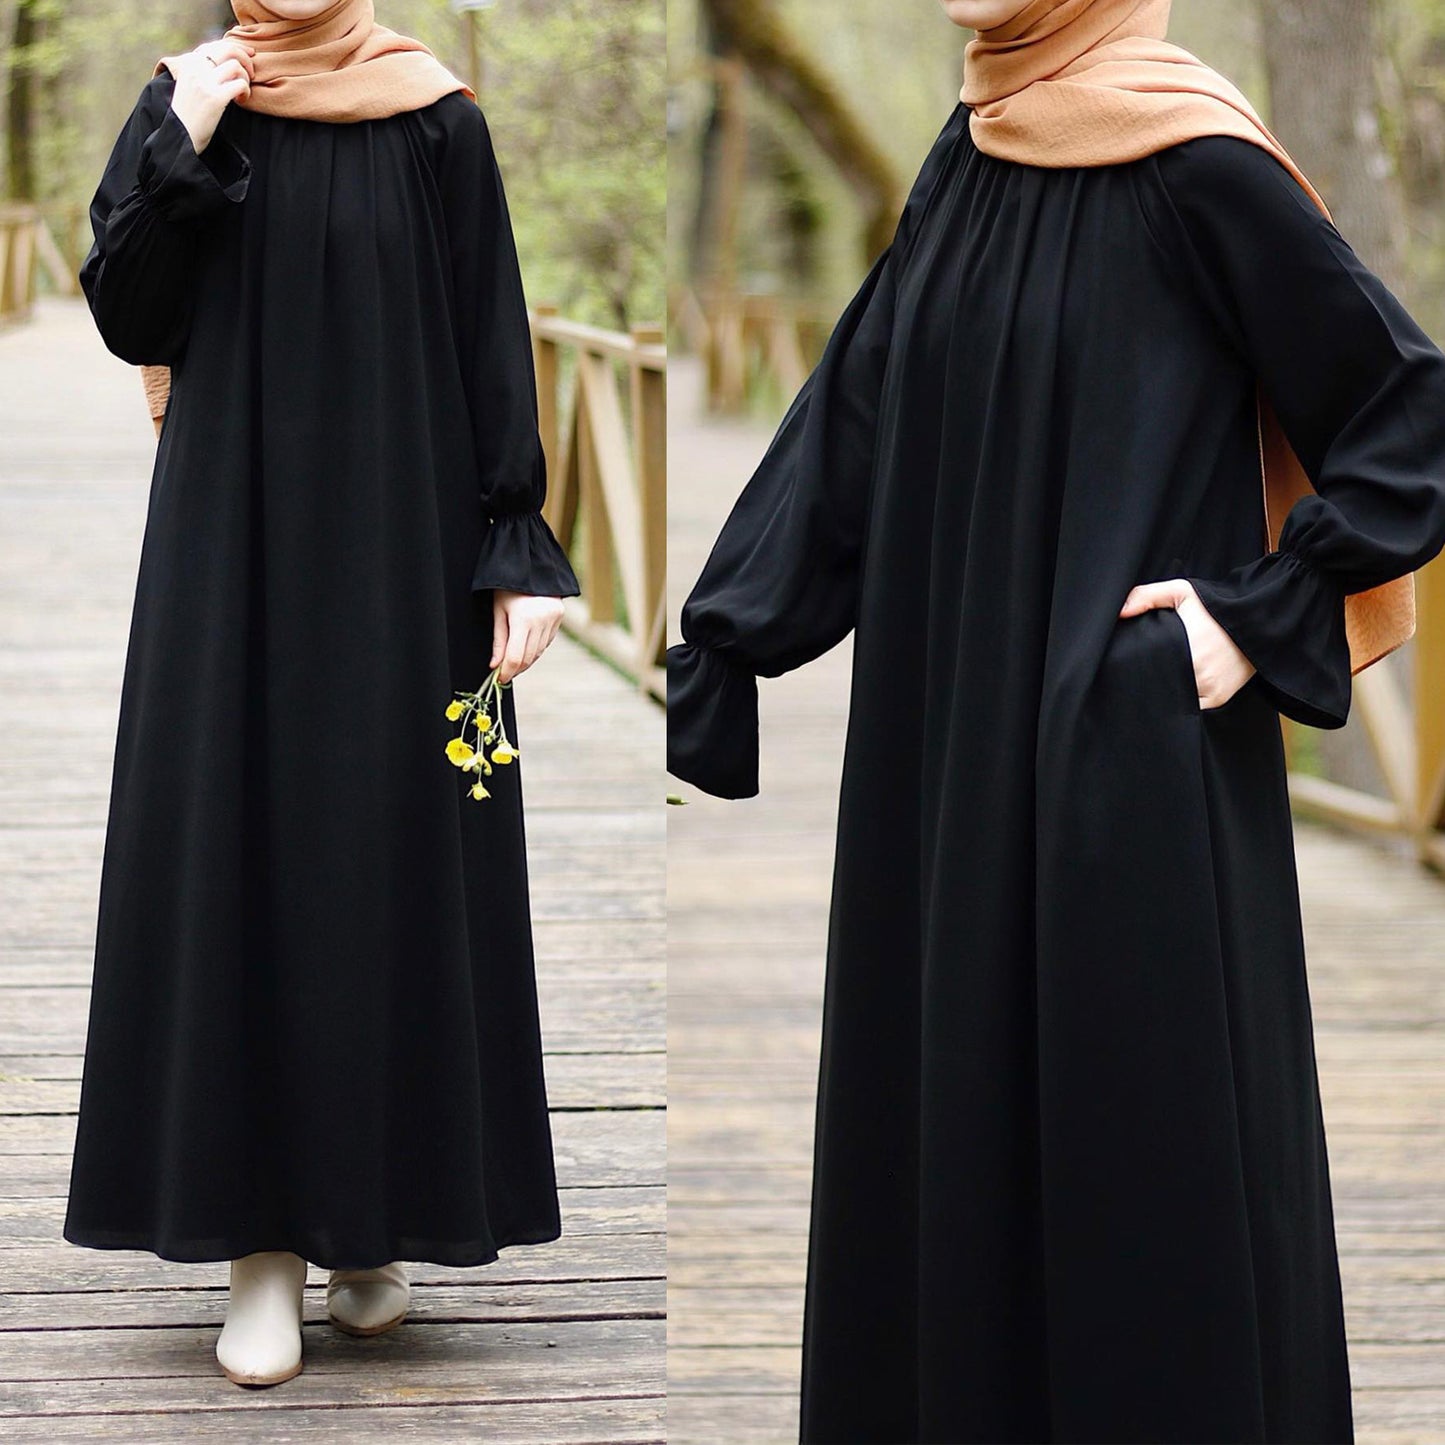 Solid color bell sleeve long sleeve casual long skirt abaya (Shipping not included)